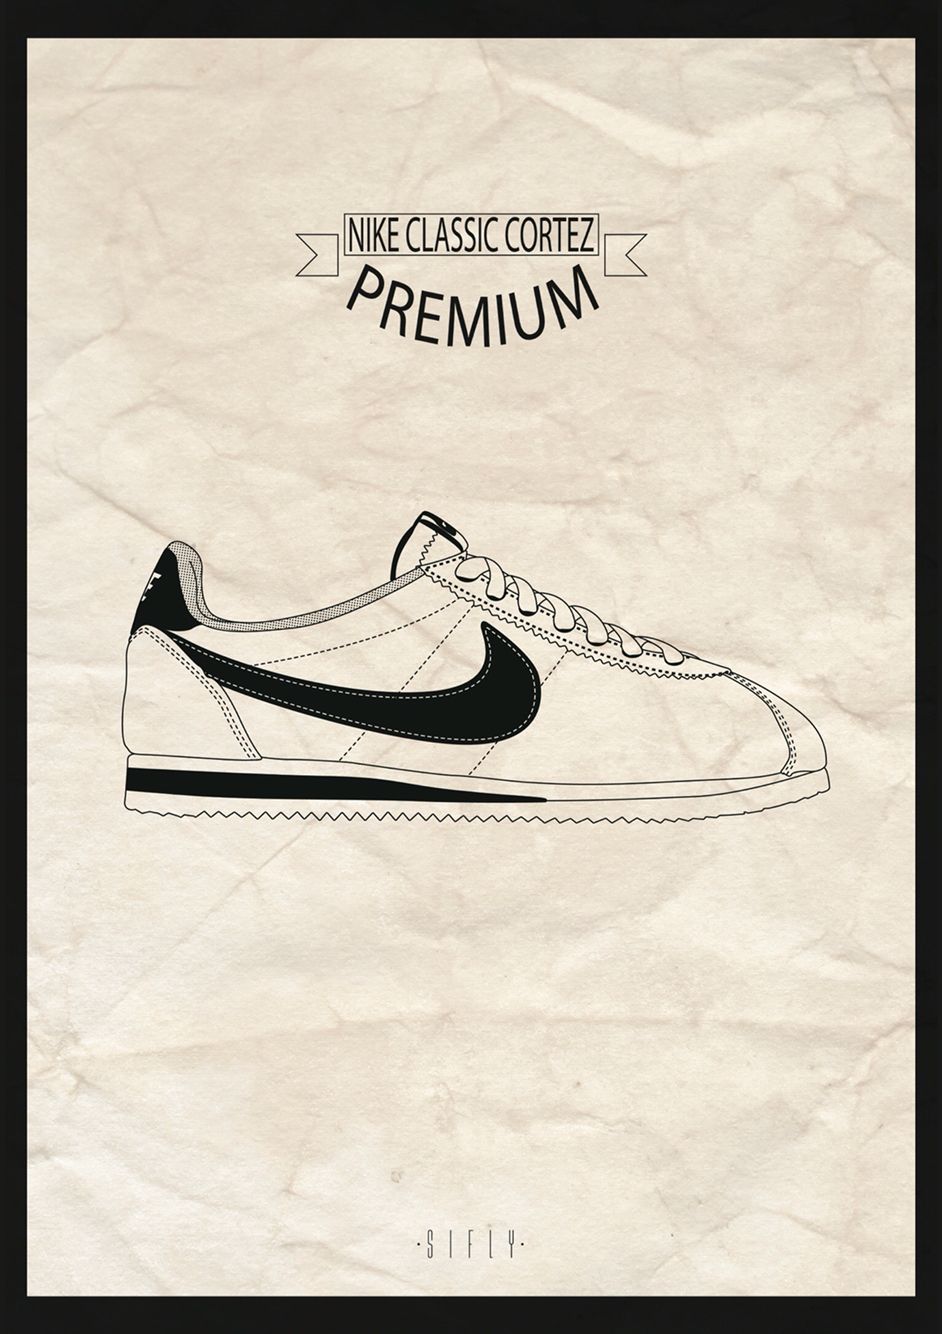 NIKE CLASSIC CORTEZ PREMIUM VECTOR BY SIFLY. Nike art, Sneaker art, Sneakers illustration